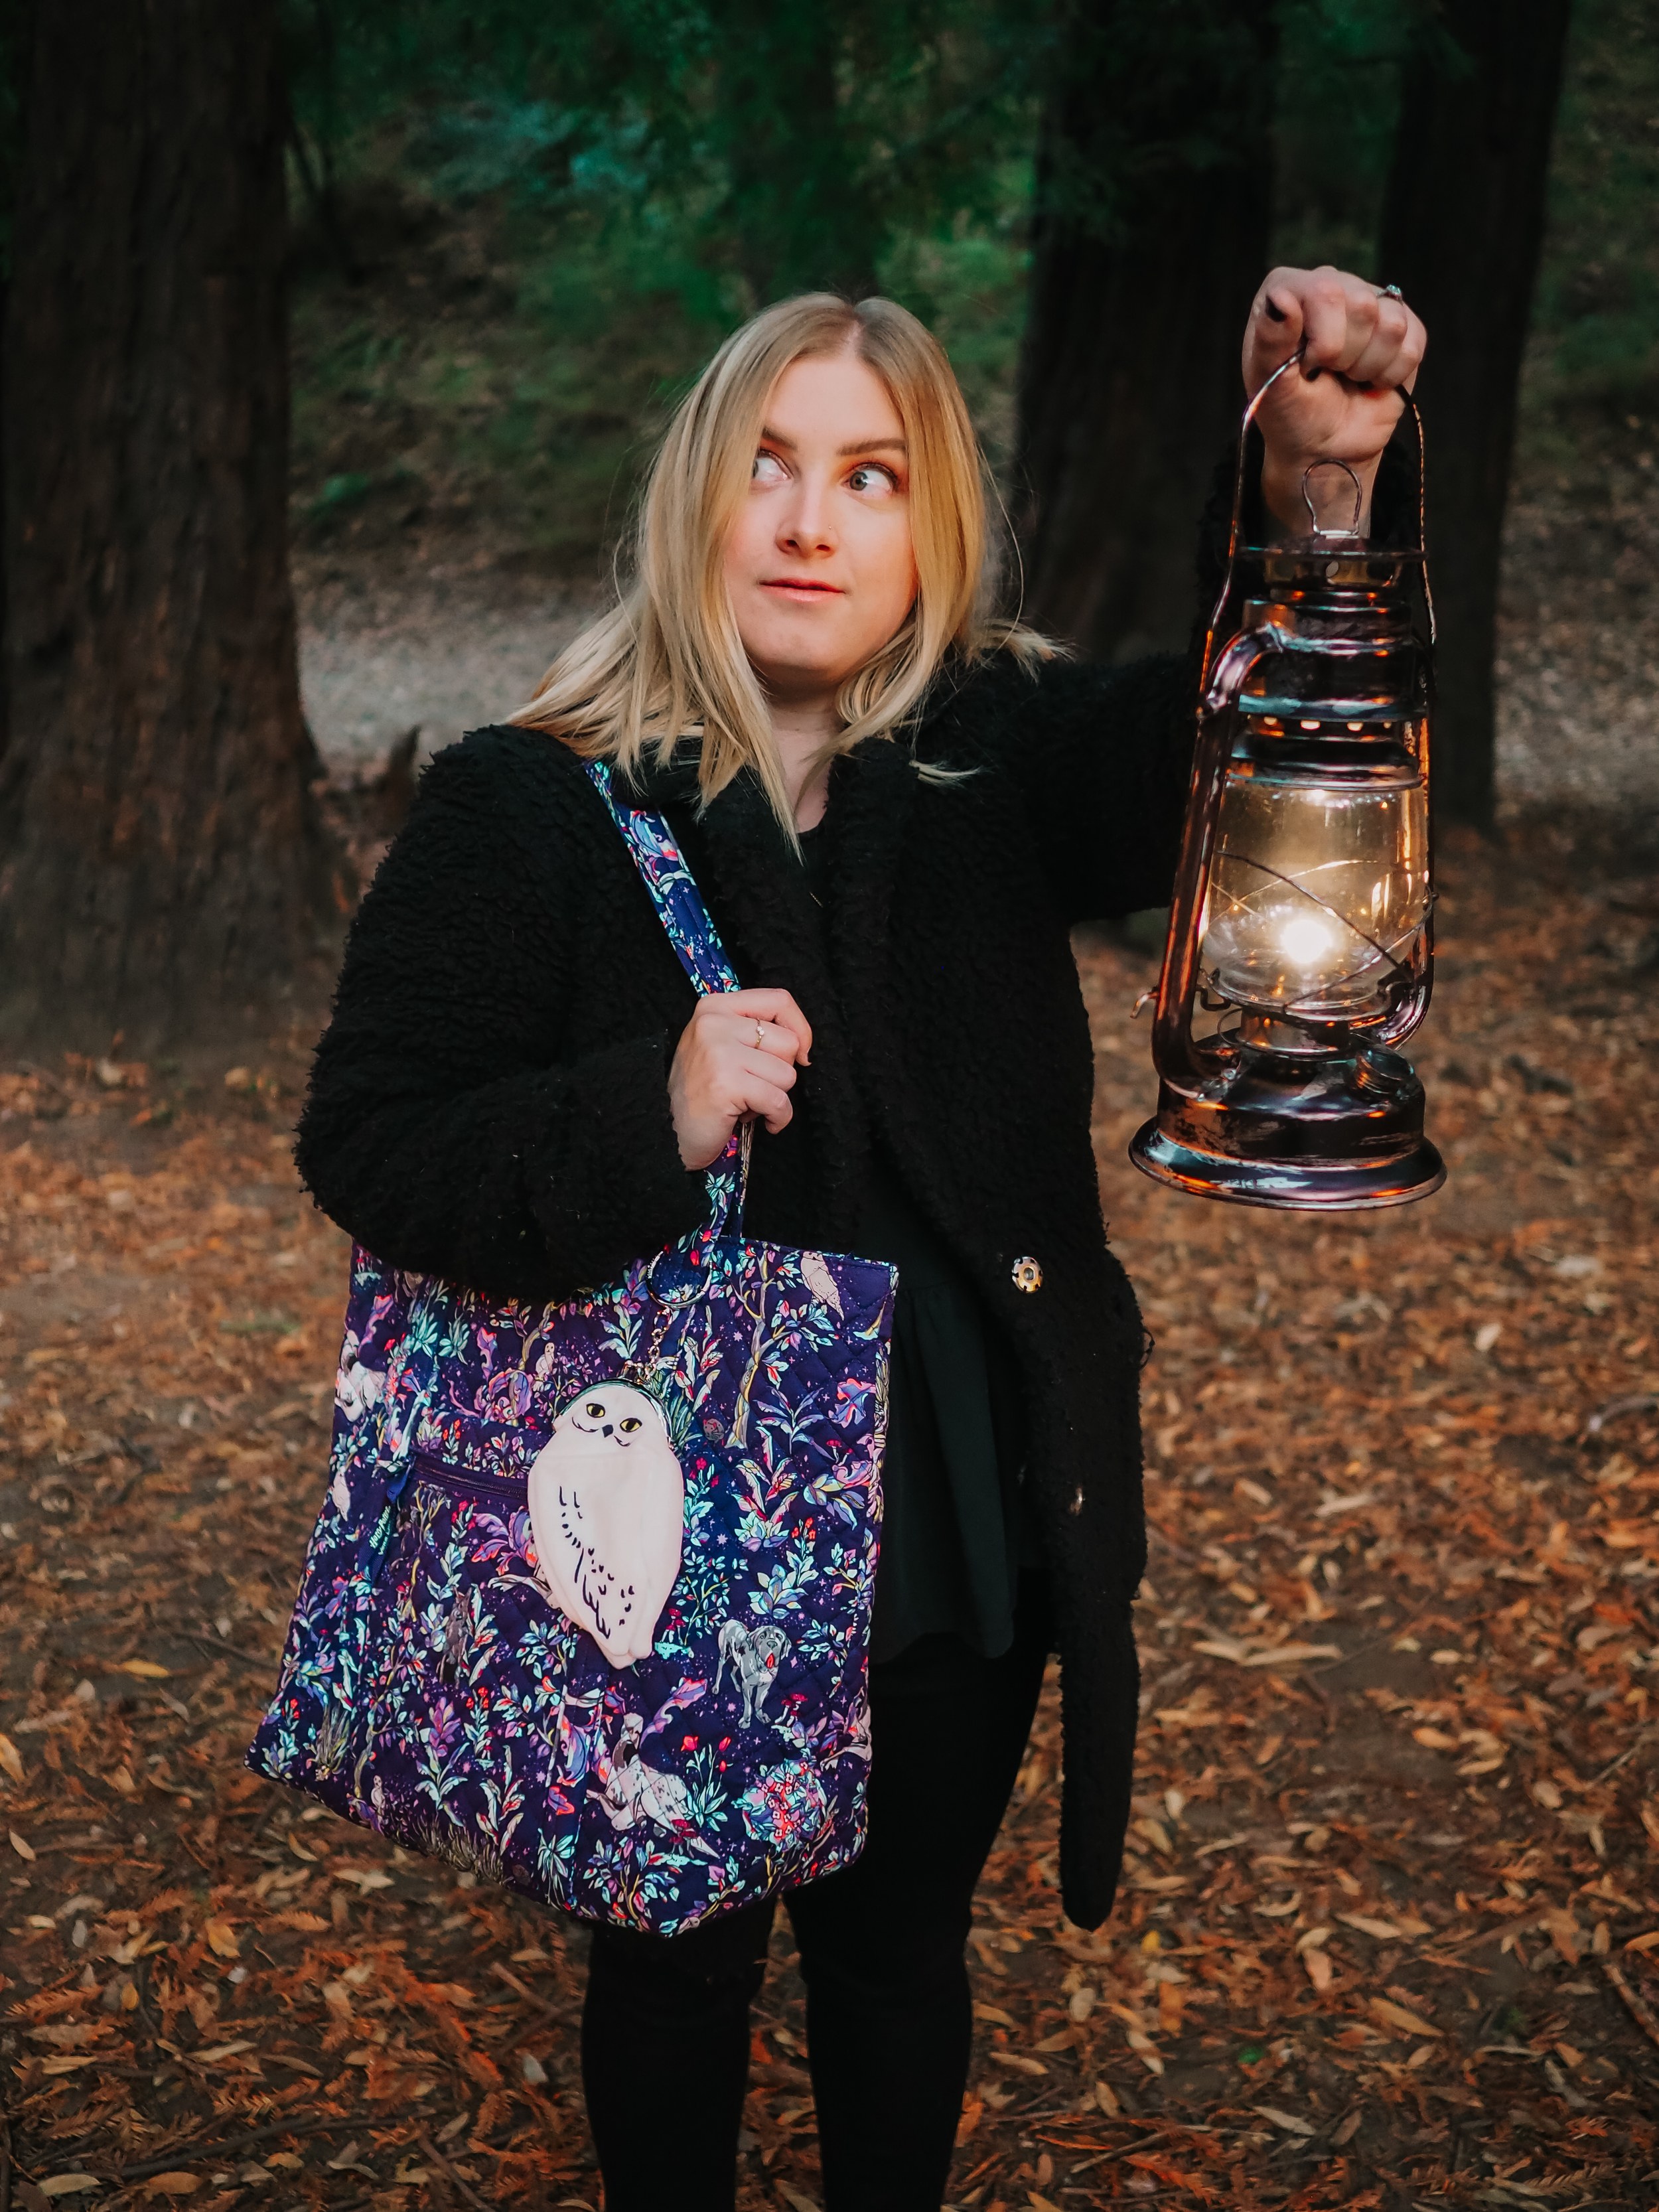 Kelsey from Blondes & Bagels showcases the new Forbidden Forest inspired Vera Bradley Harry Potter collection, packed with magical creatures.